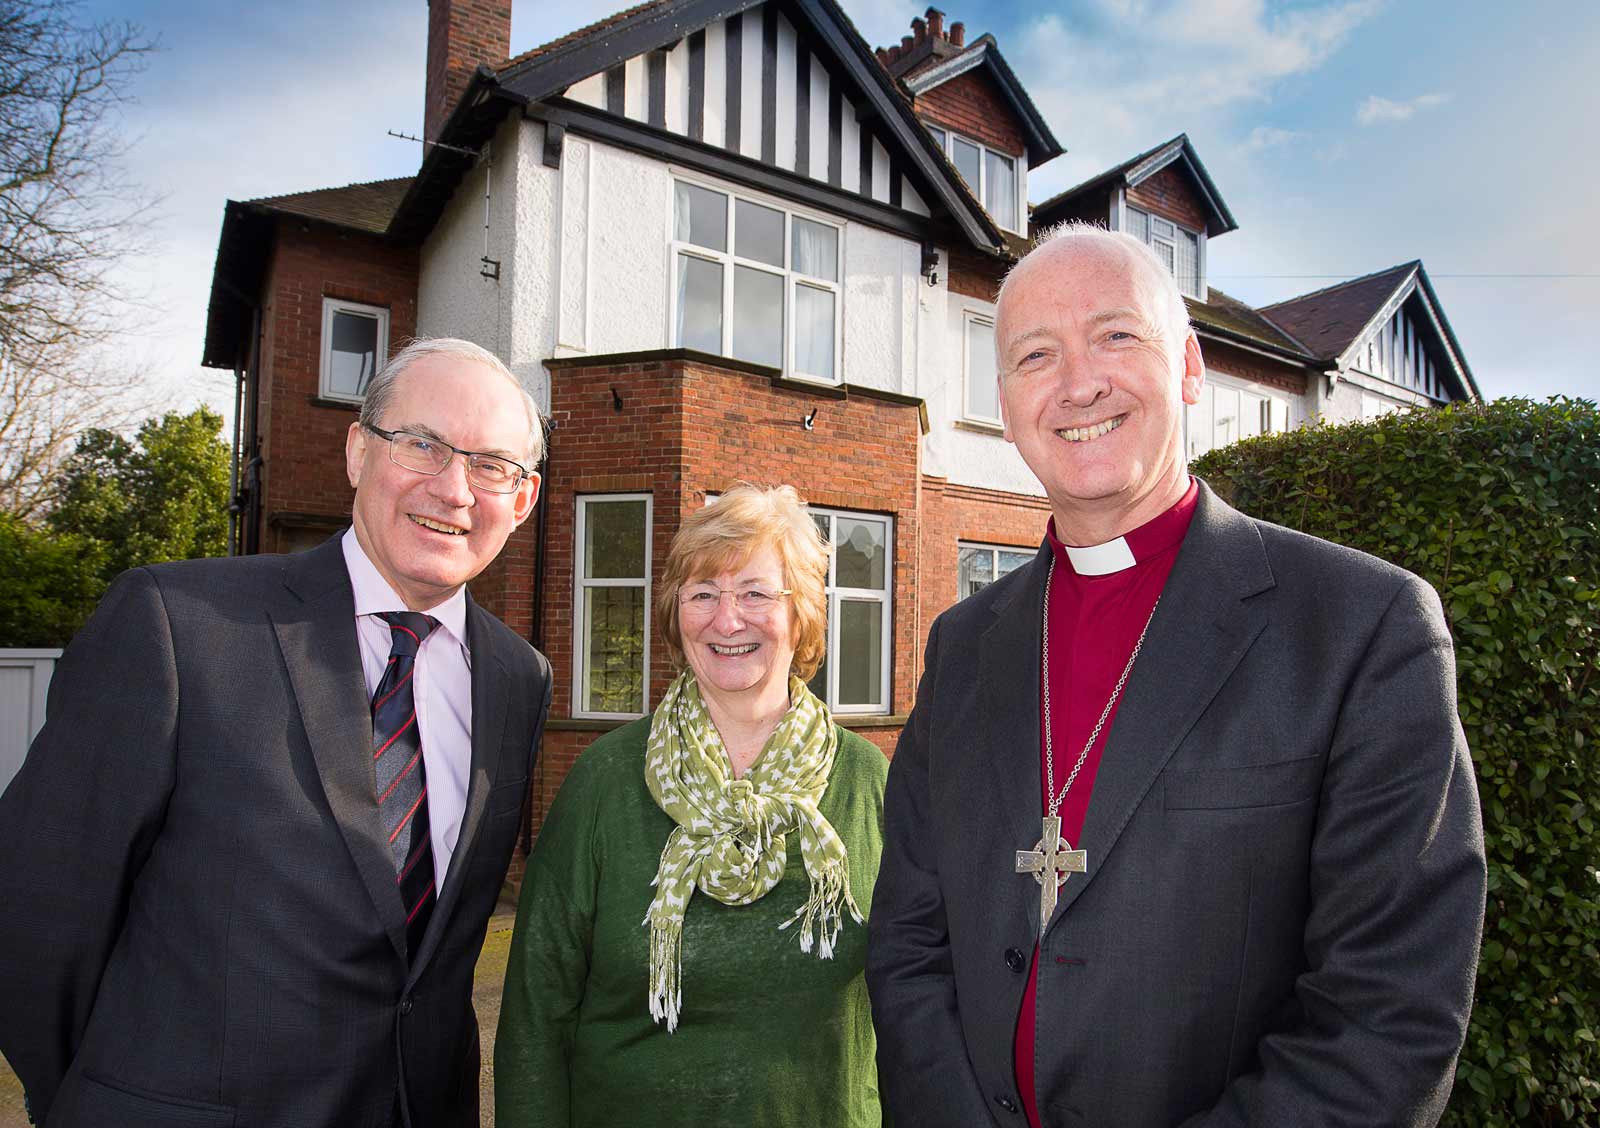 Nigel McClea and Moira Start of Wellspring and the Rt Rev Nick Baines, the Bishop of Leeds, outside Wellspring’s new premises and in the garden